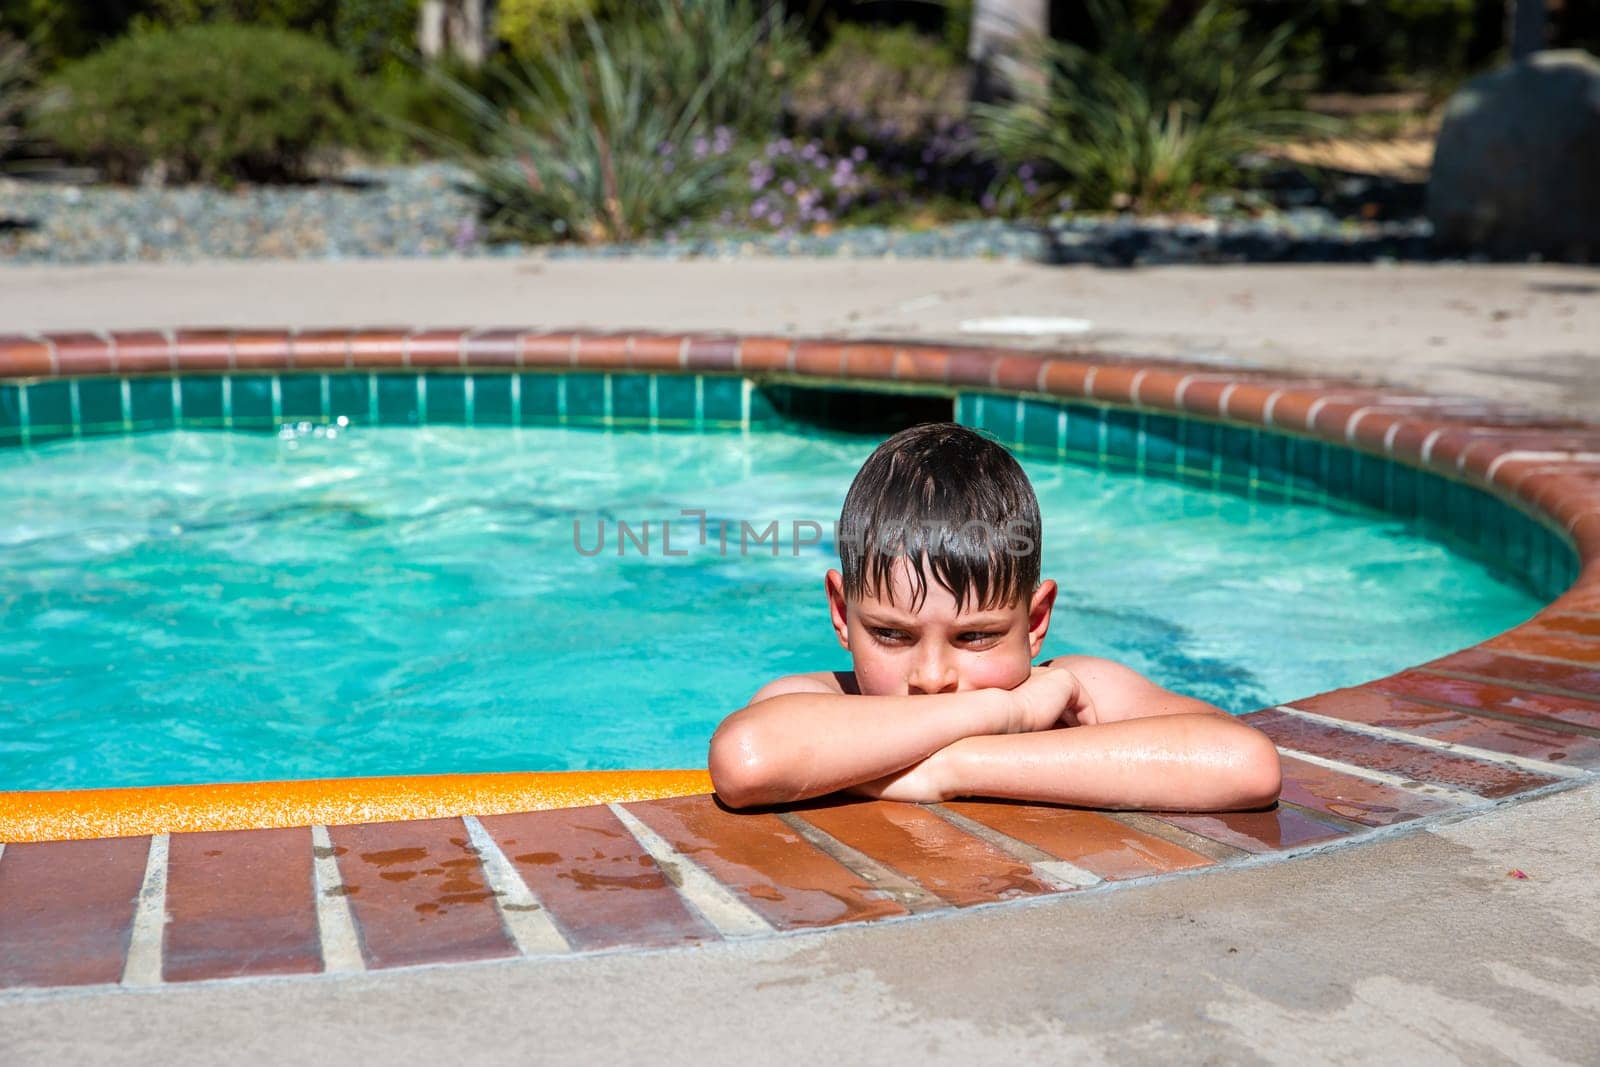 Oudoor summer activity. Concept of fun, health and vacation. A sad boy eight years old in swimming goggles is holding onto the side of the pool on a hot summer day. by Marina-A